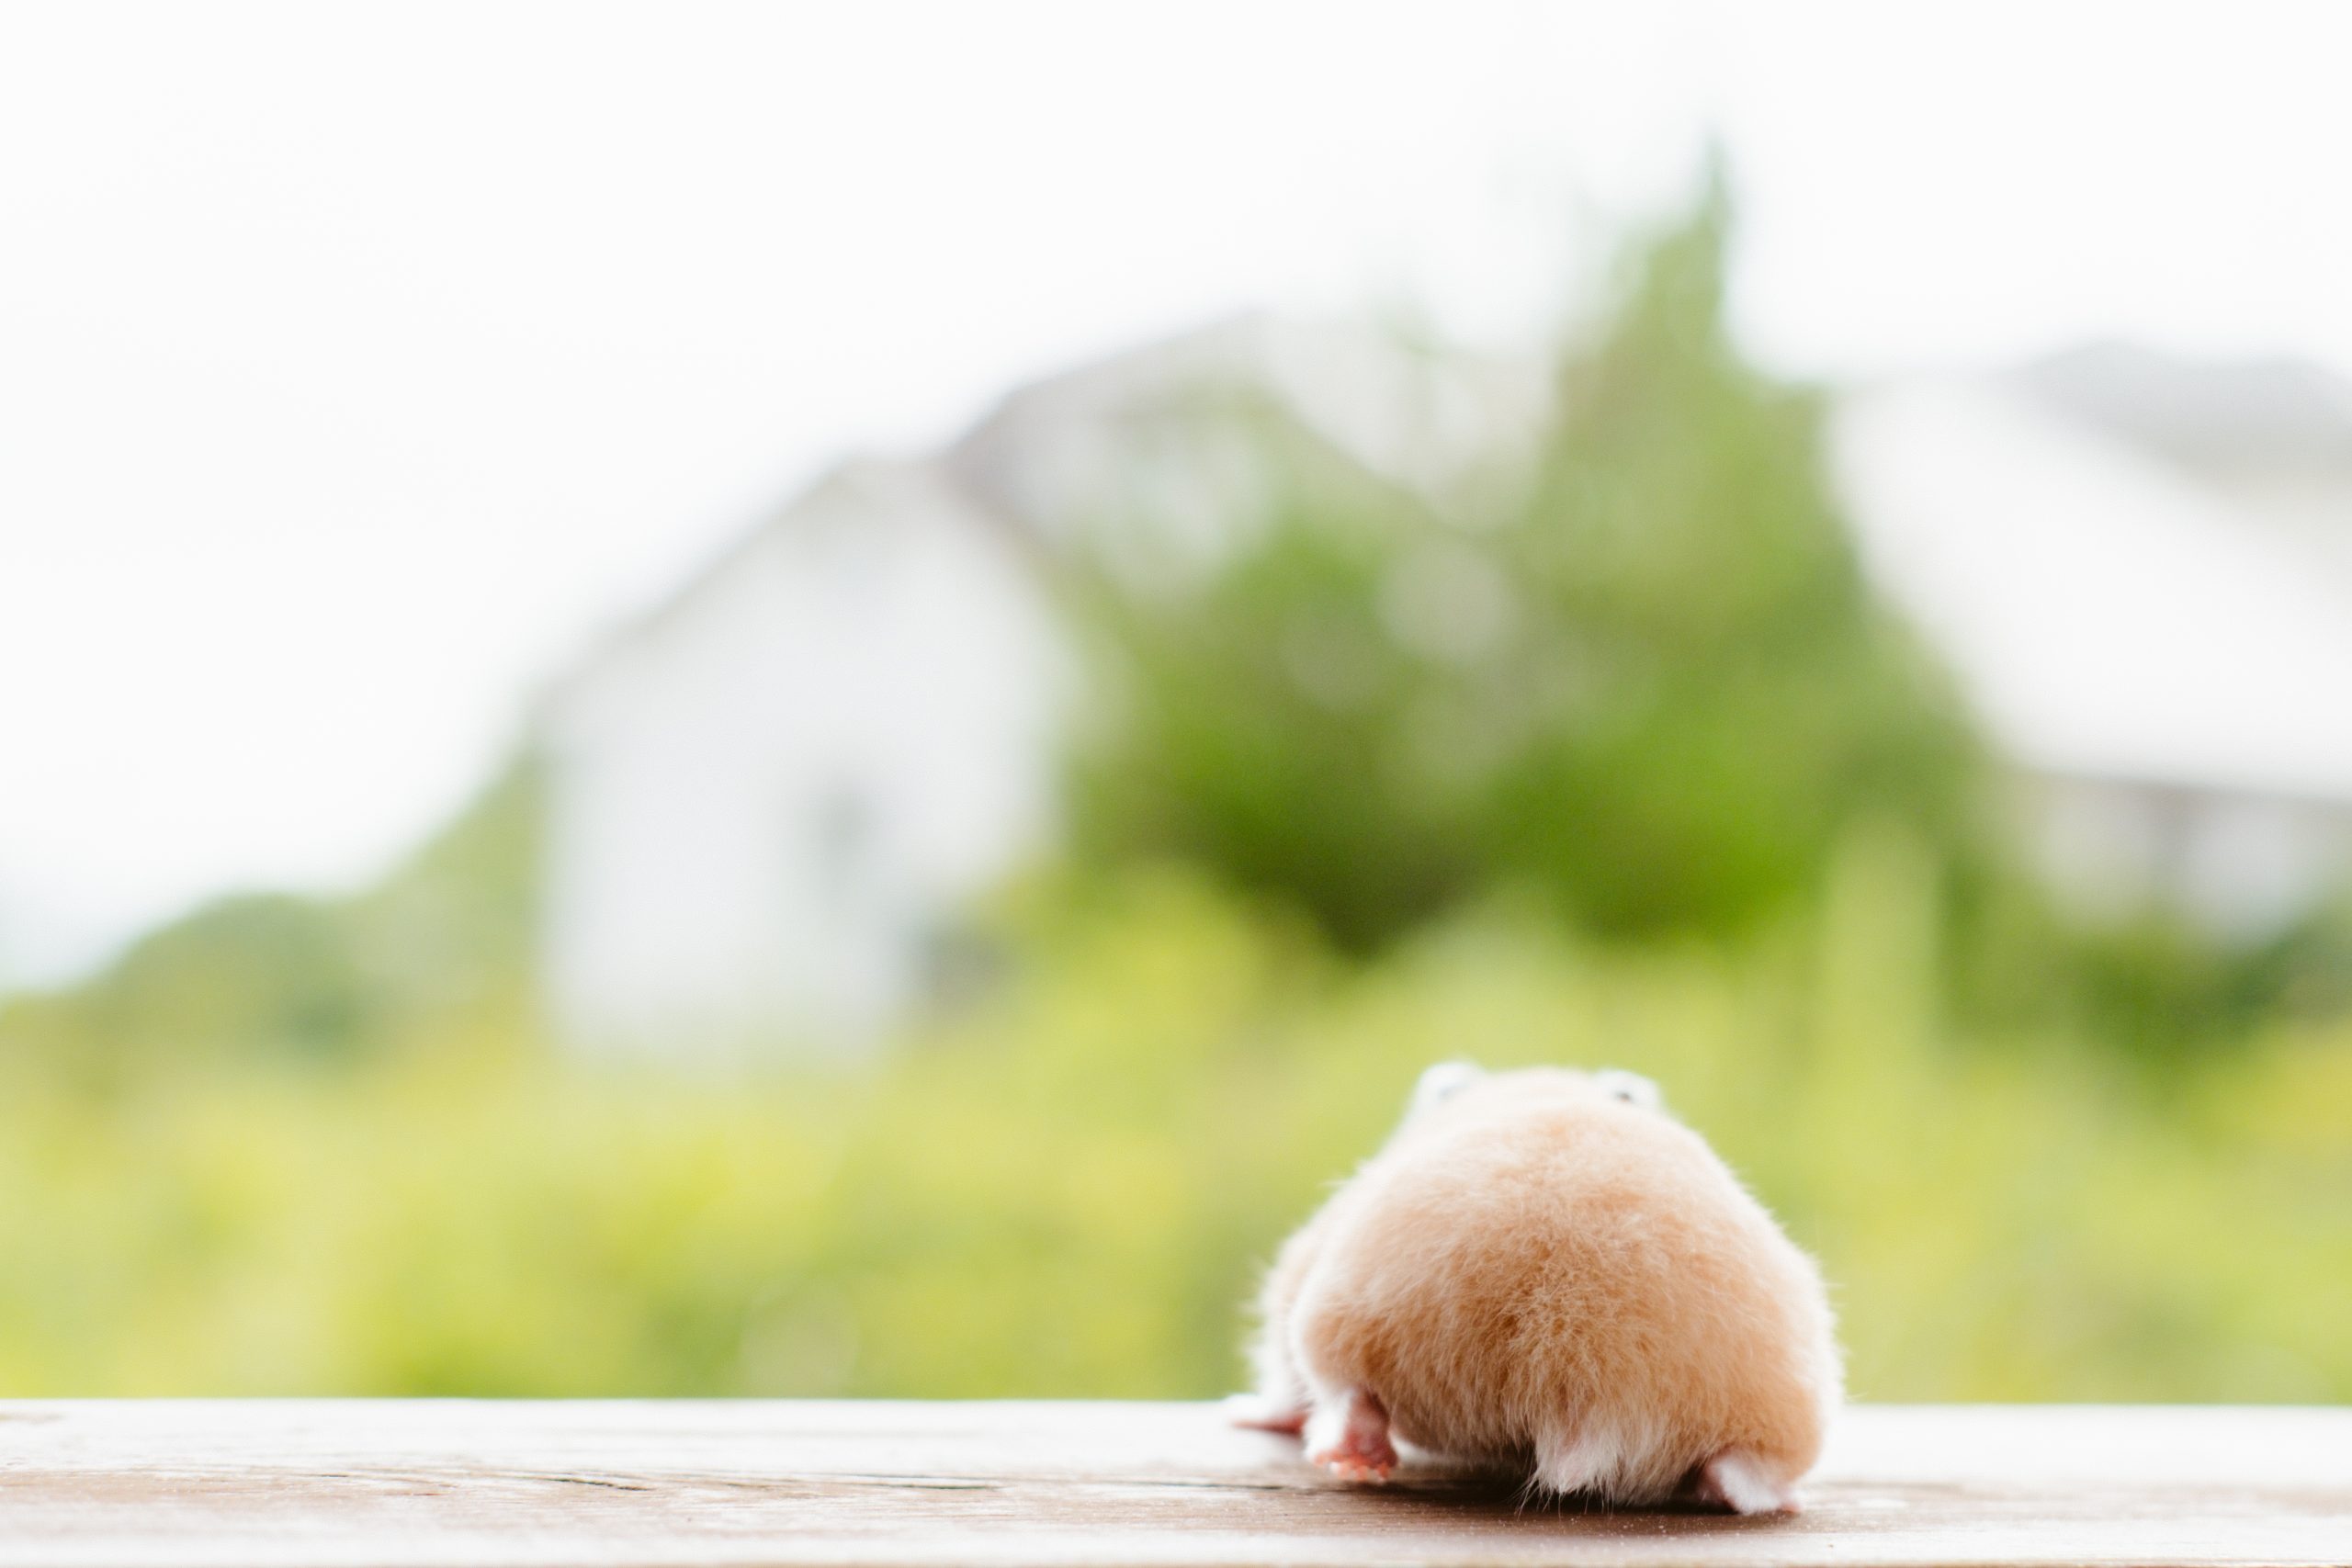 Cute back view of a hamster